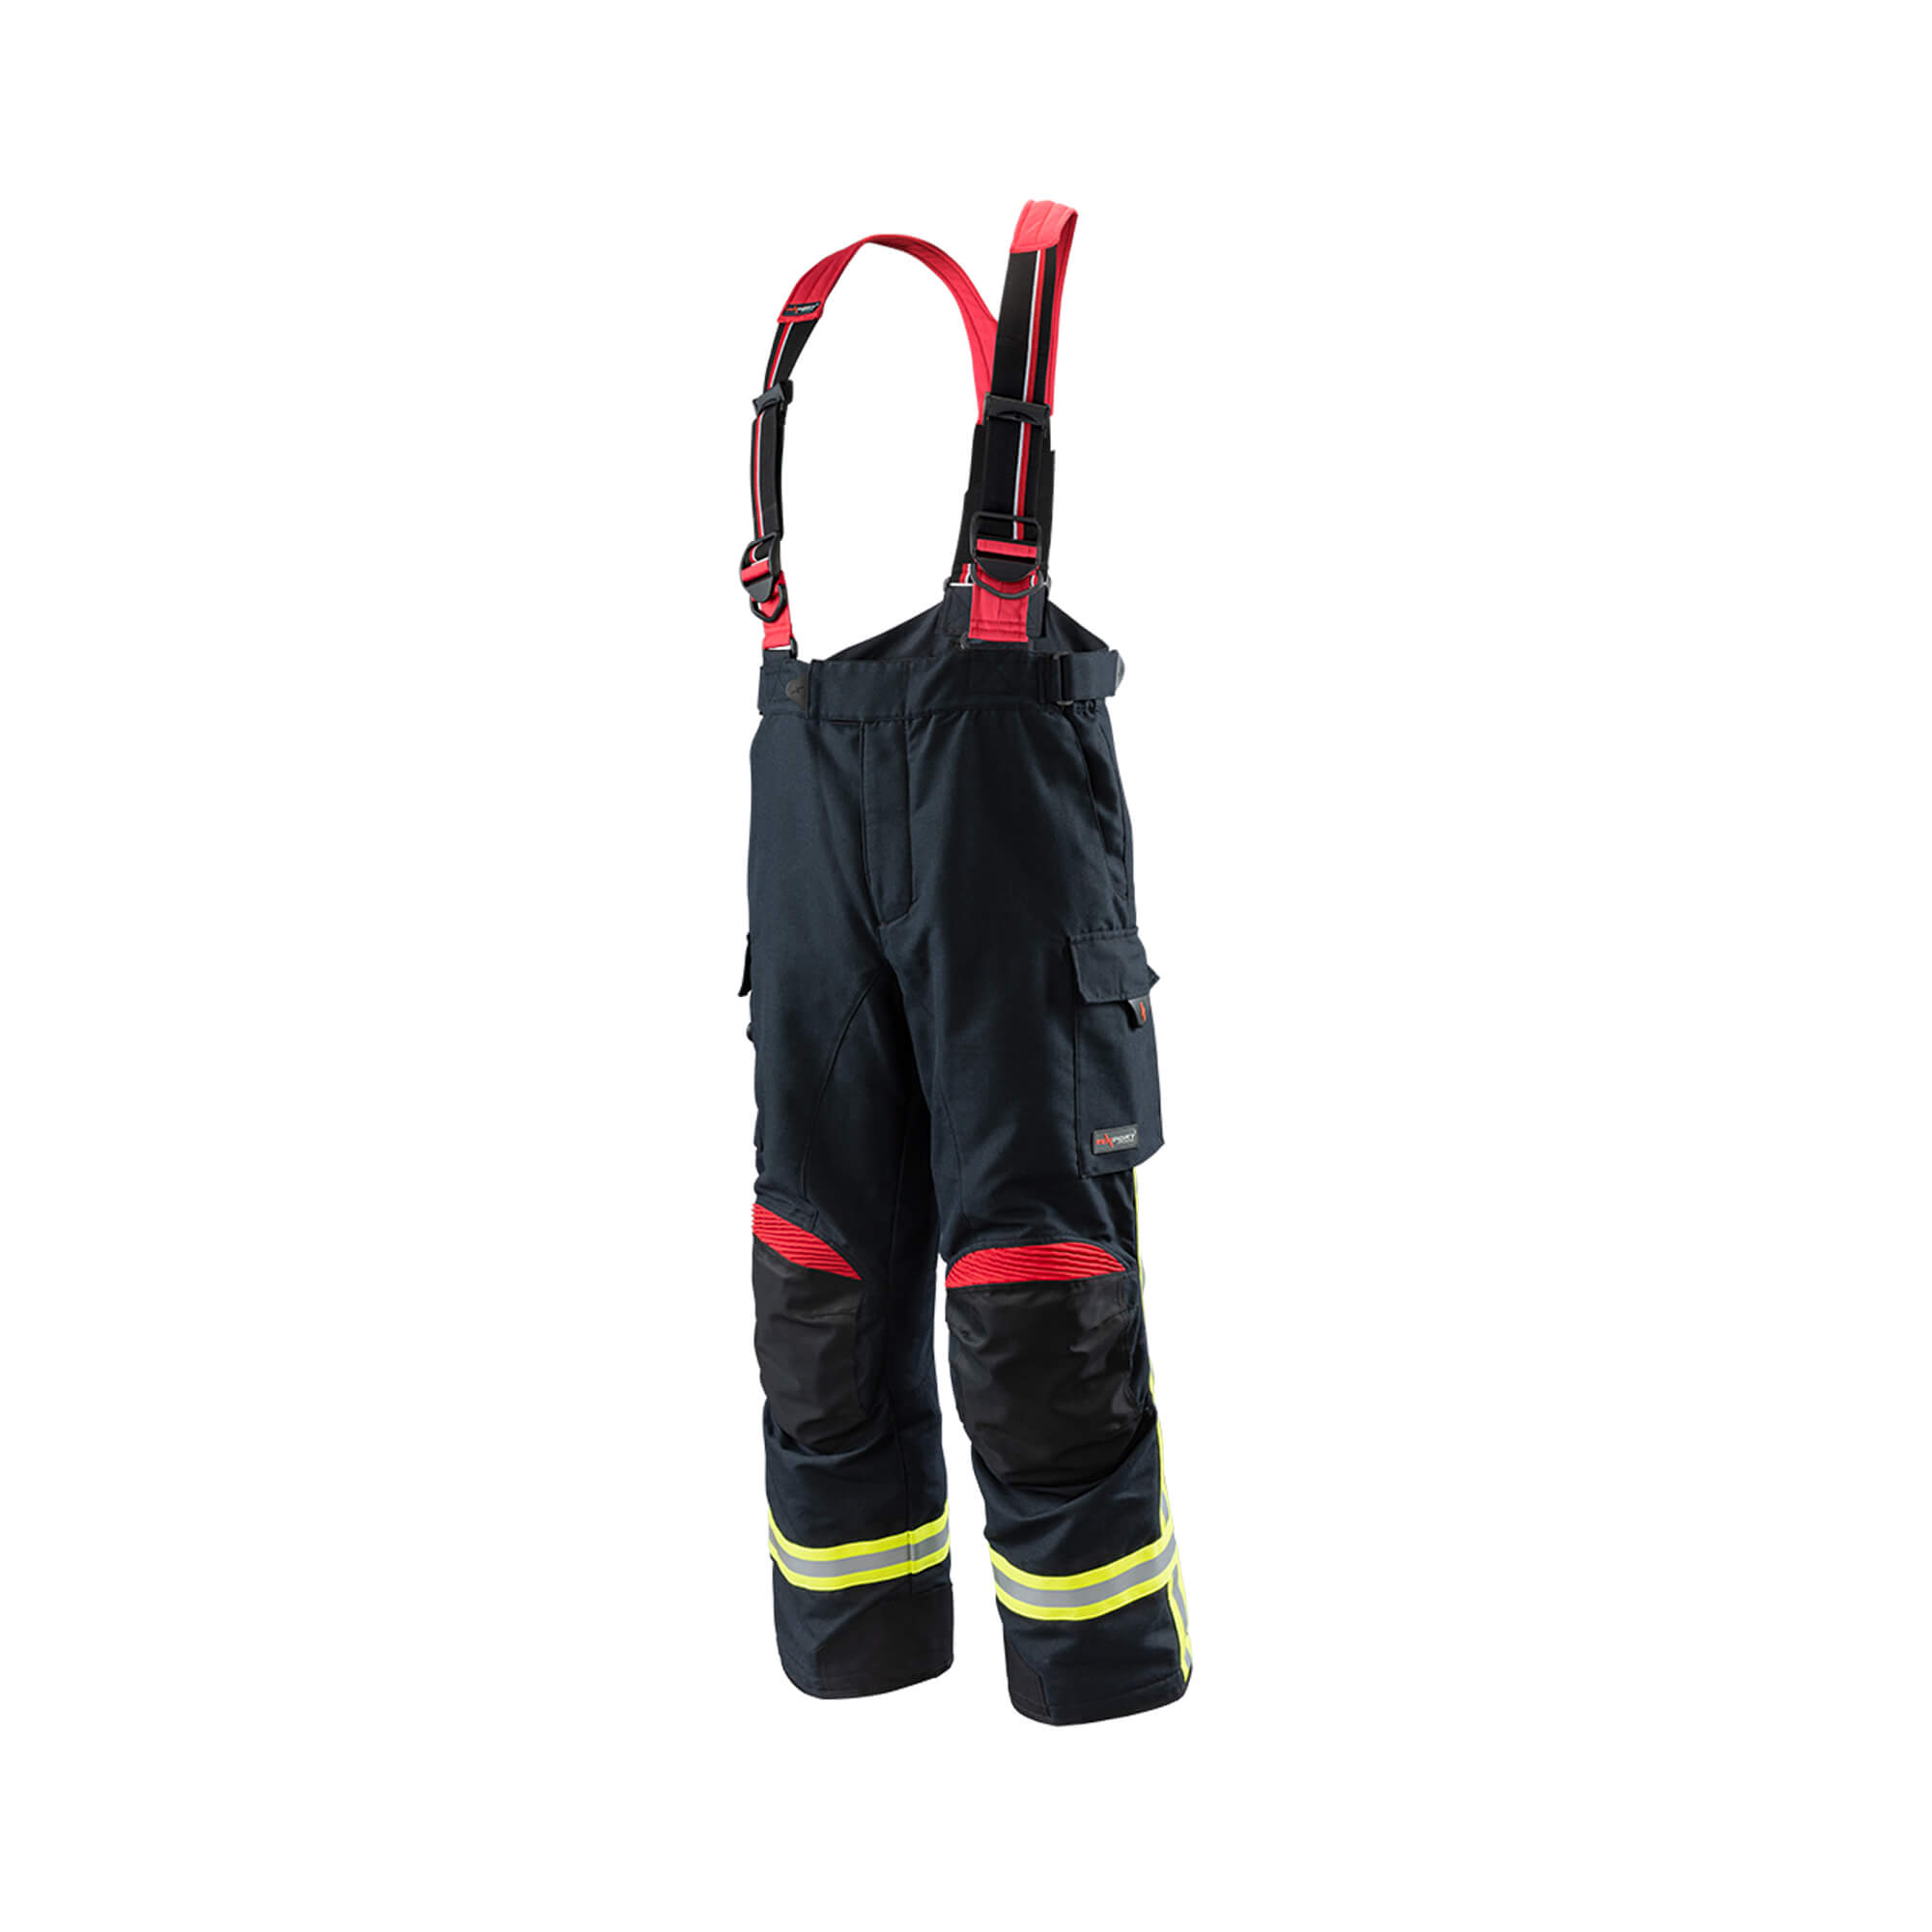 Protective Fire pants for intervention Texport Fire Stretch